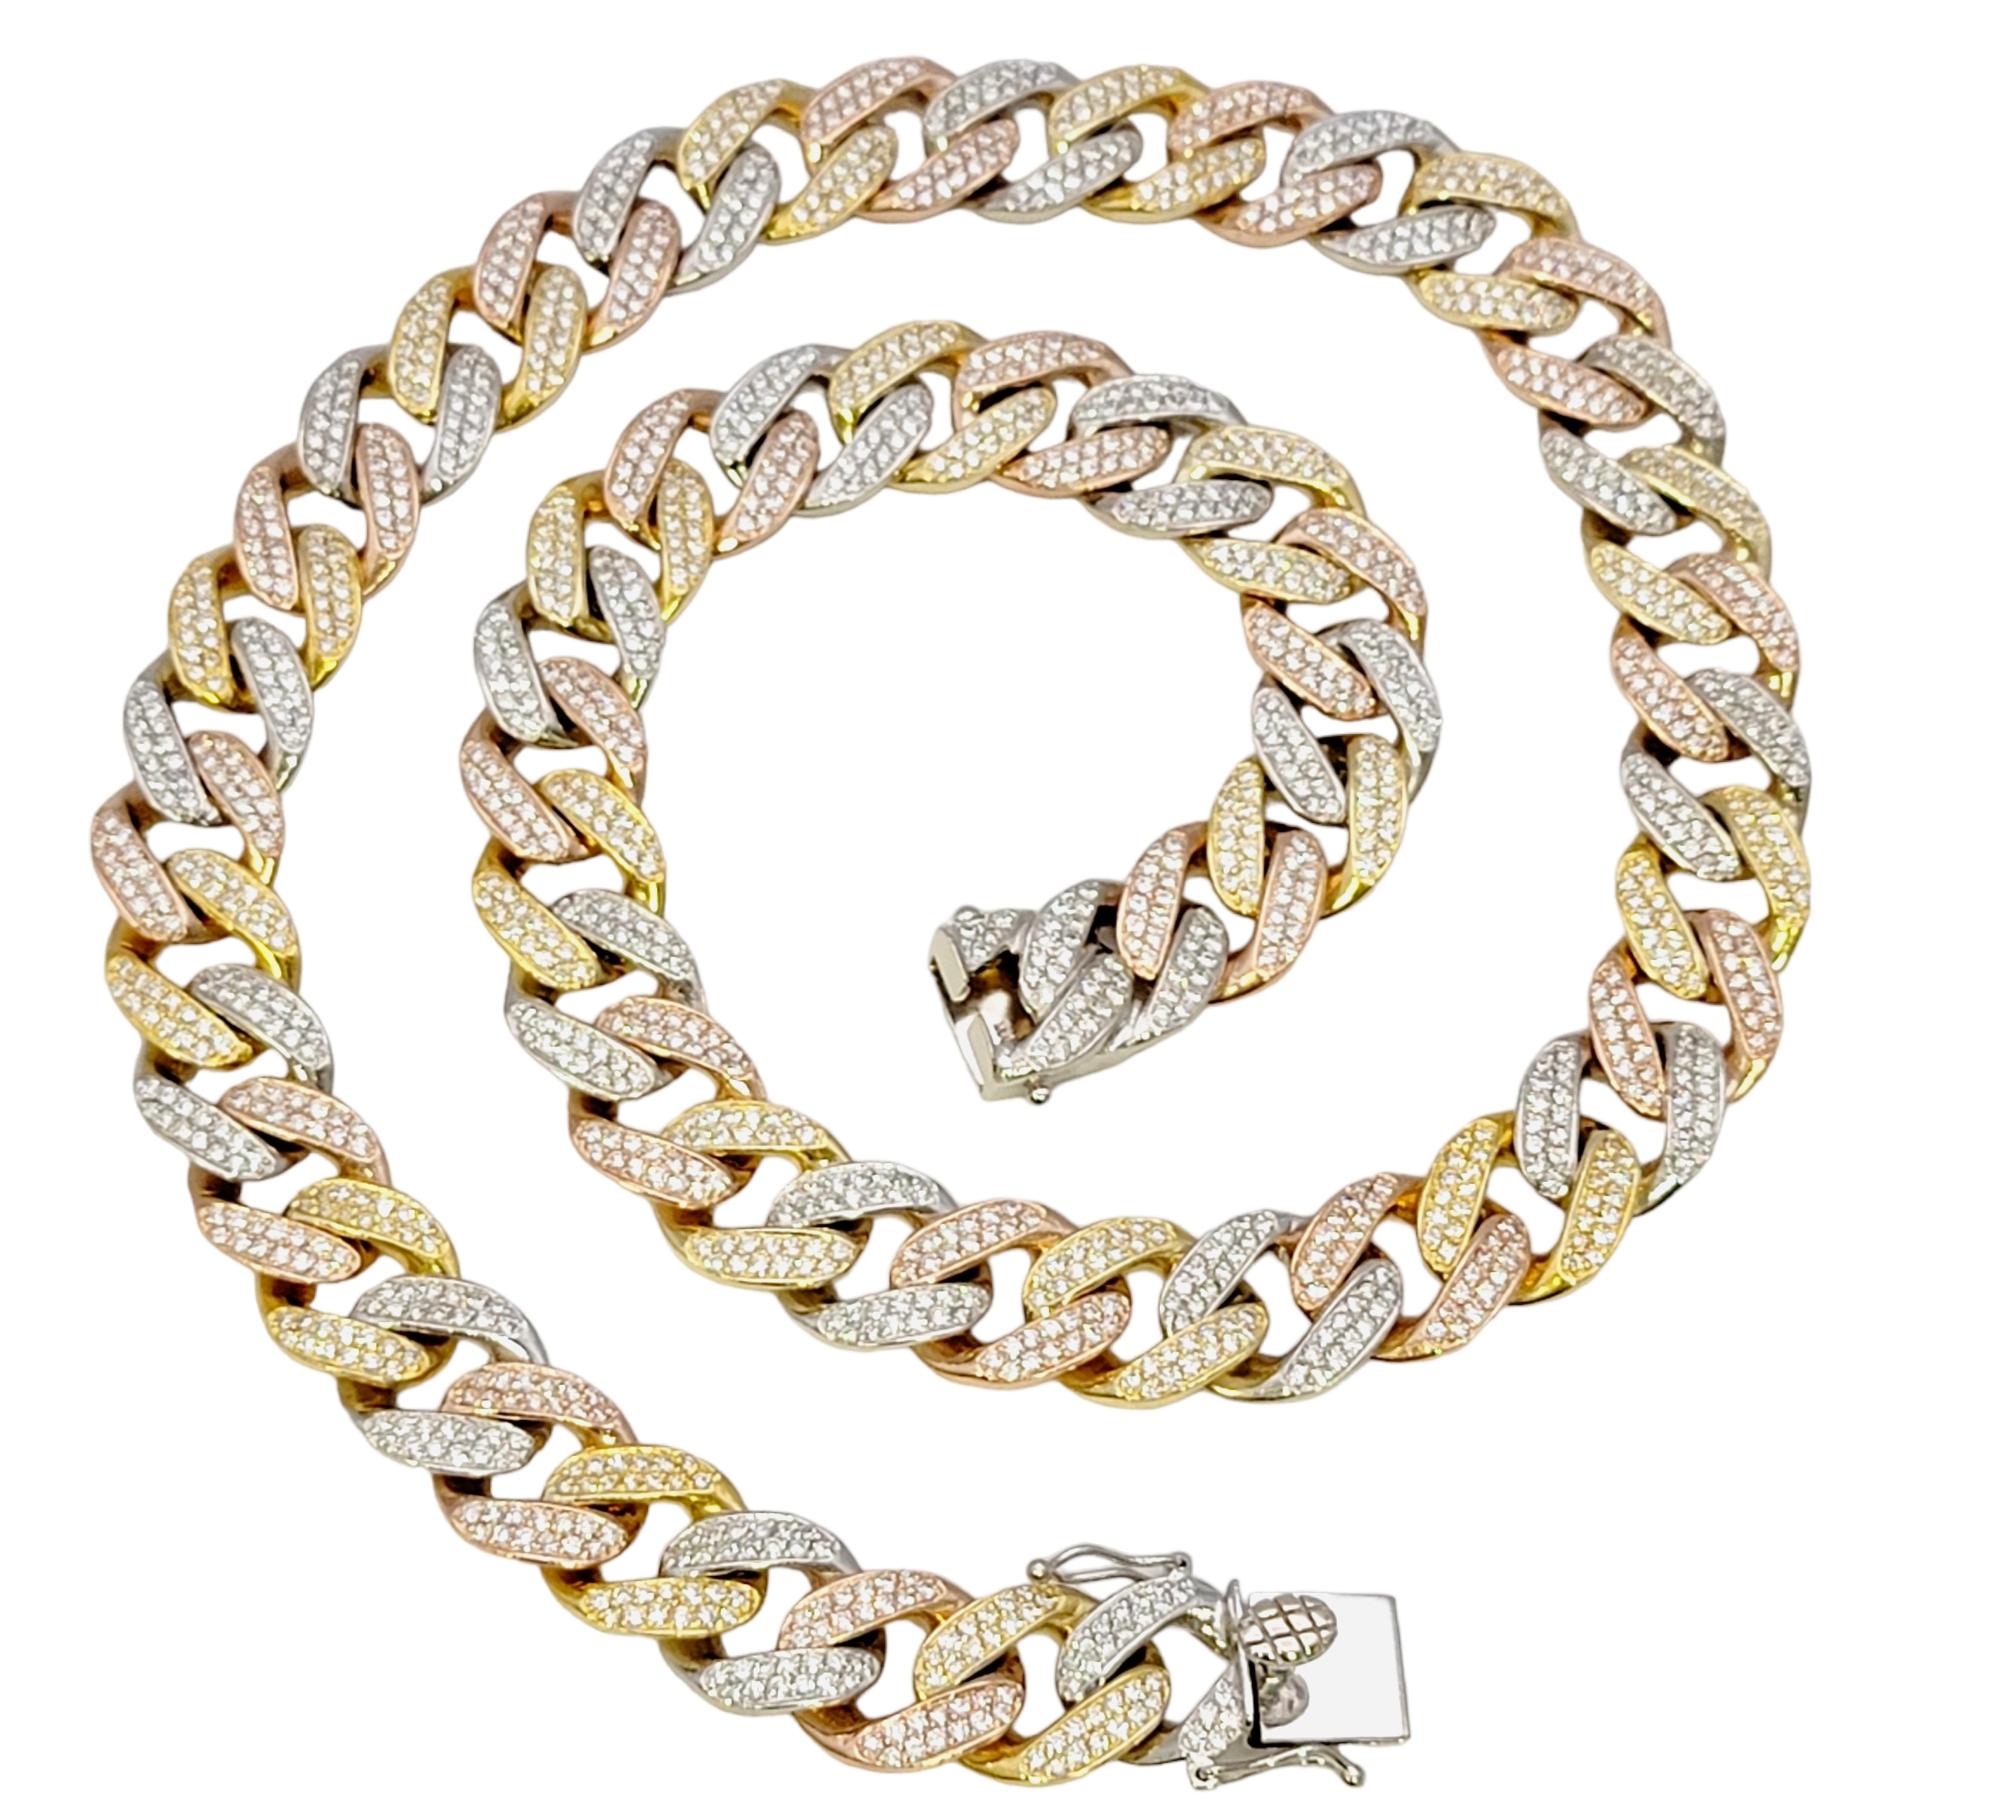 Tri-Tone Unisex Cuban Link 12 Ctw Pave Diamond Necklace in 14 Karat Gold In Good Condition For Sale In Scottsdale, AZ